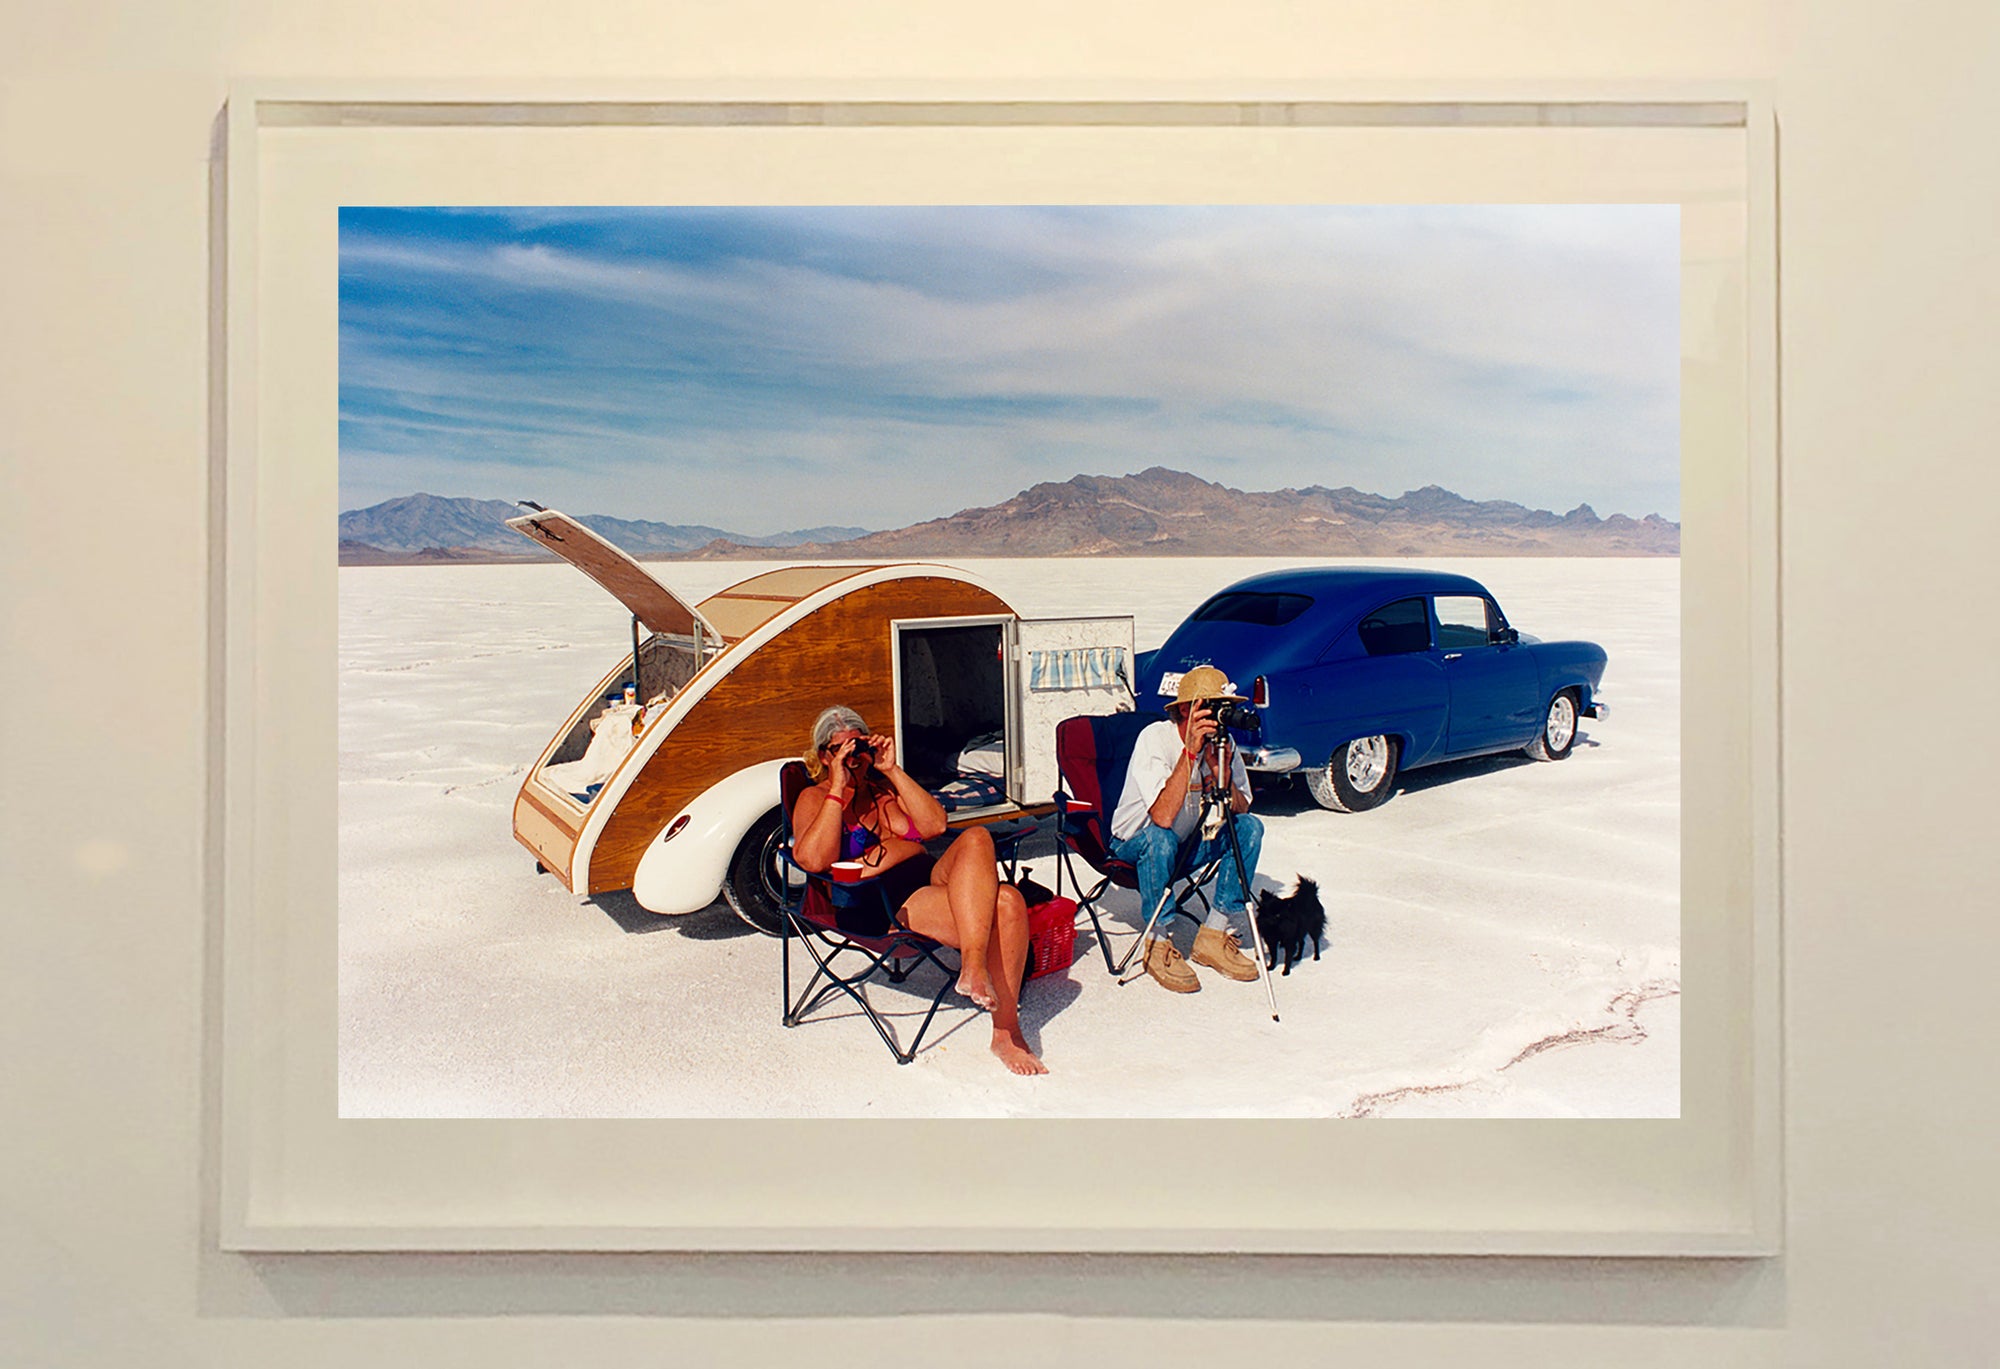 'Christine's '52 Henry J & teardrop' was captured in Bonneville Salt Flats, Utah, the iconic home of speed. This photograph shows the mountains in the distance meeting and contrasting with the flatness of the salt pan, whilst a pair of retro spectators look out at the speeding cars in the distance.